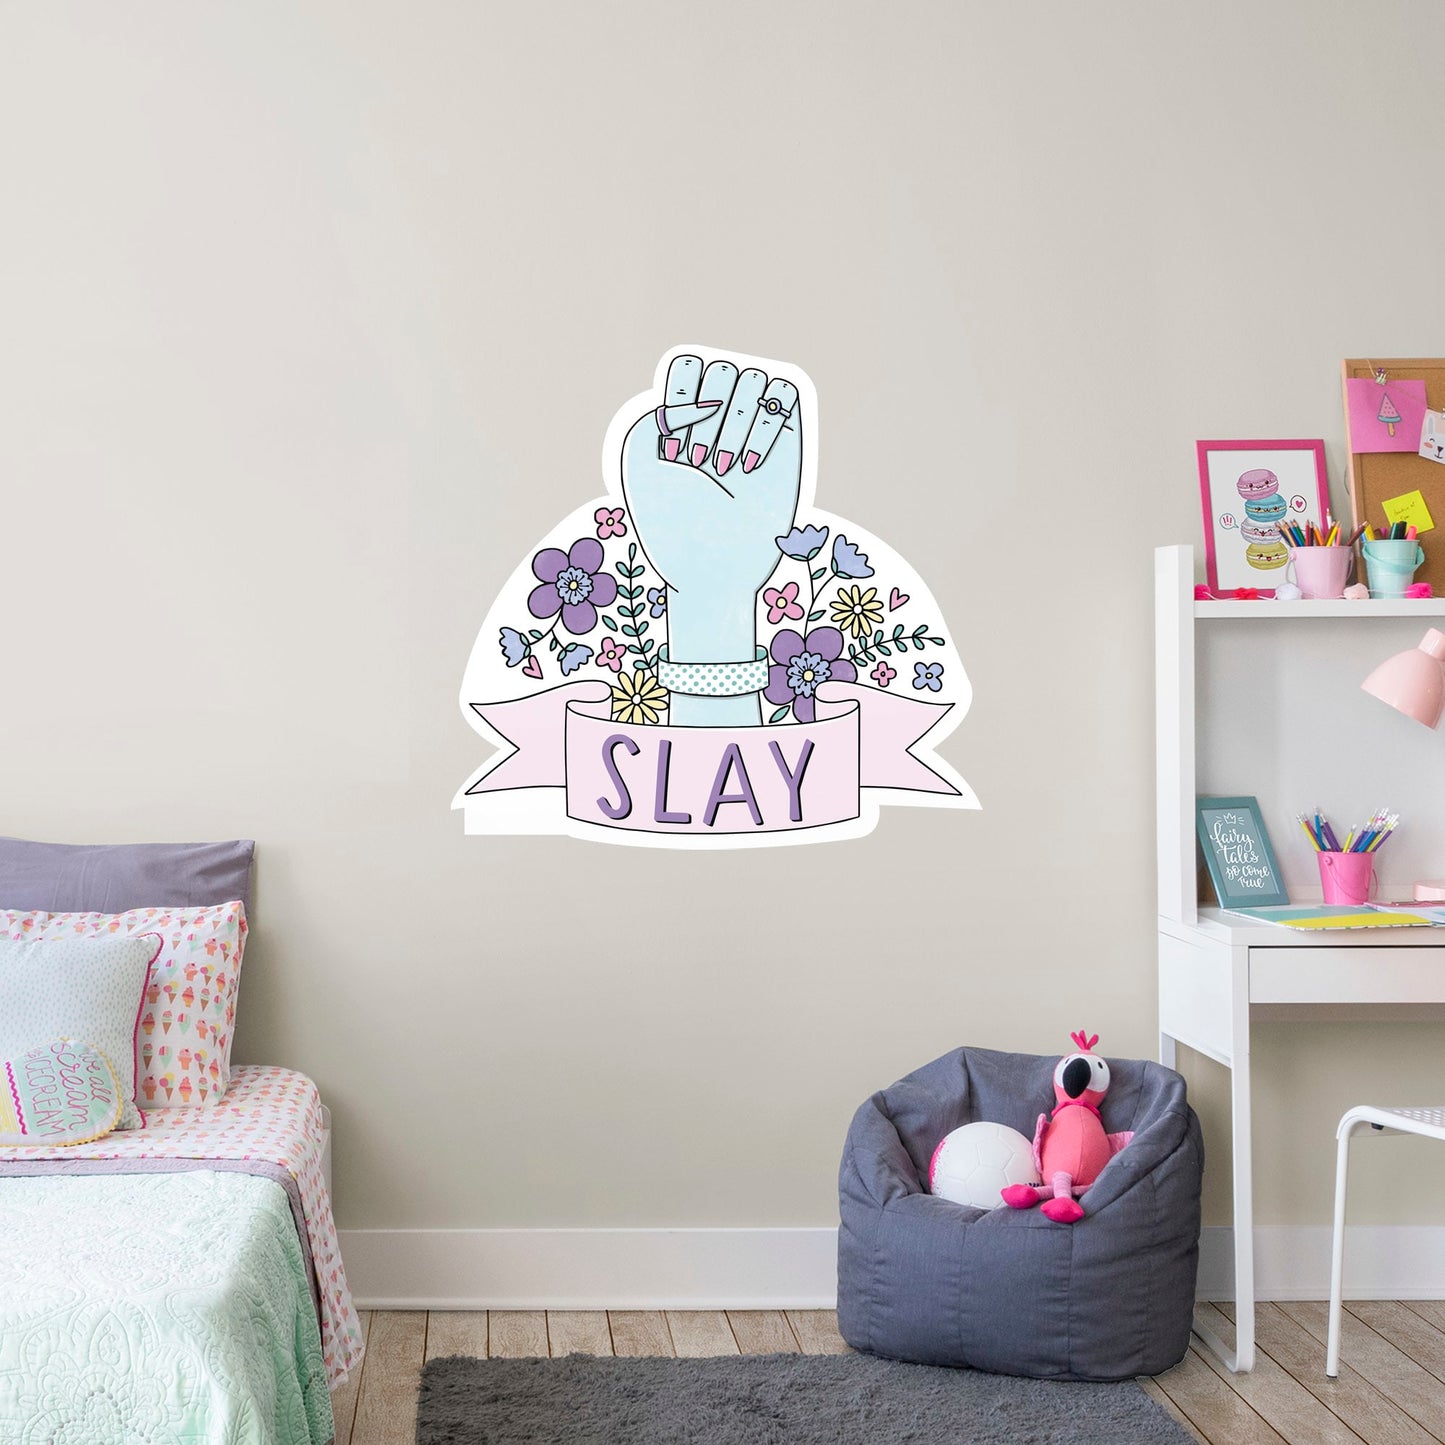 Slay        - Officially Licensed Big Moods Removable     Adhesive Decal